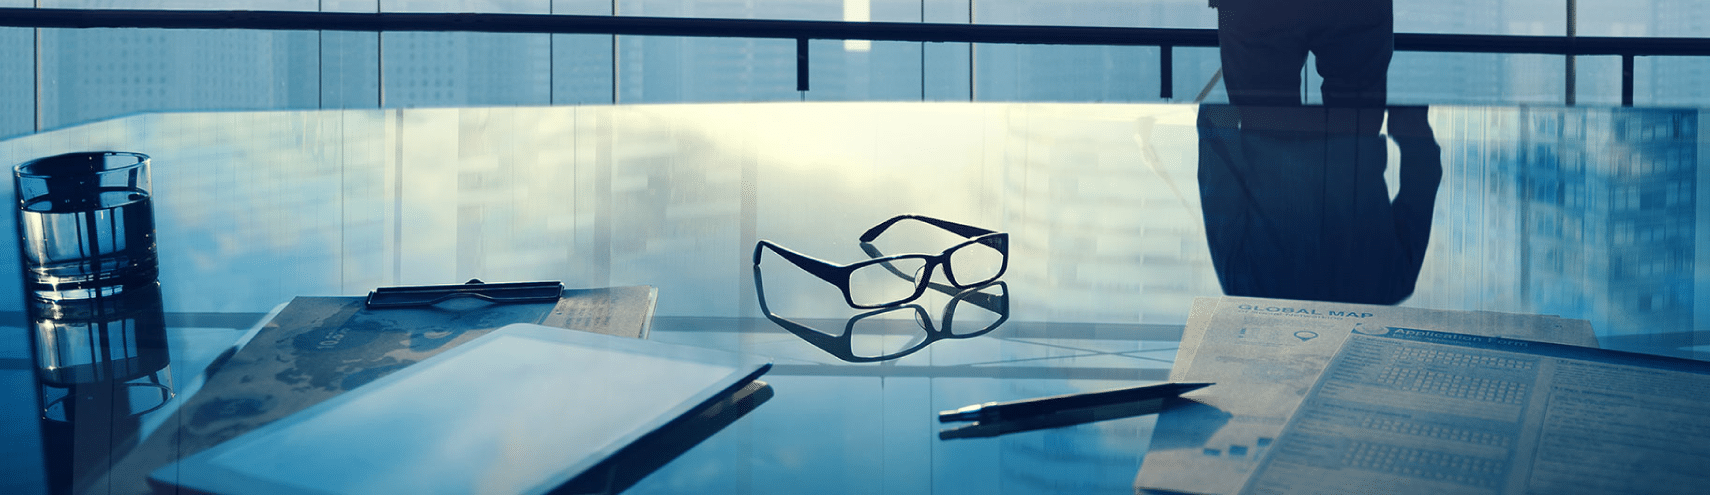 Office space focusing on reading glasses on table with man in background looking at the horizon.